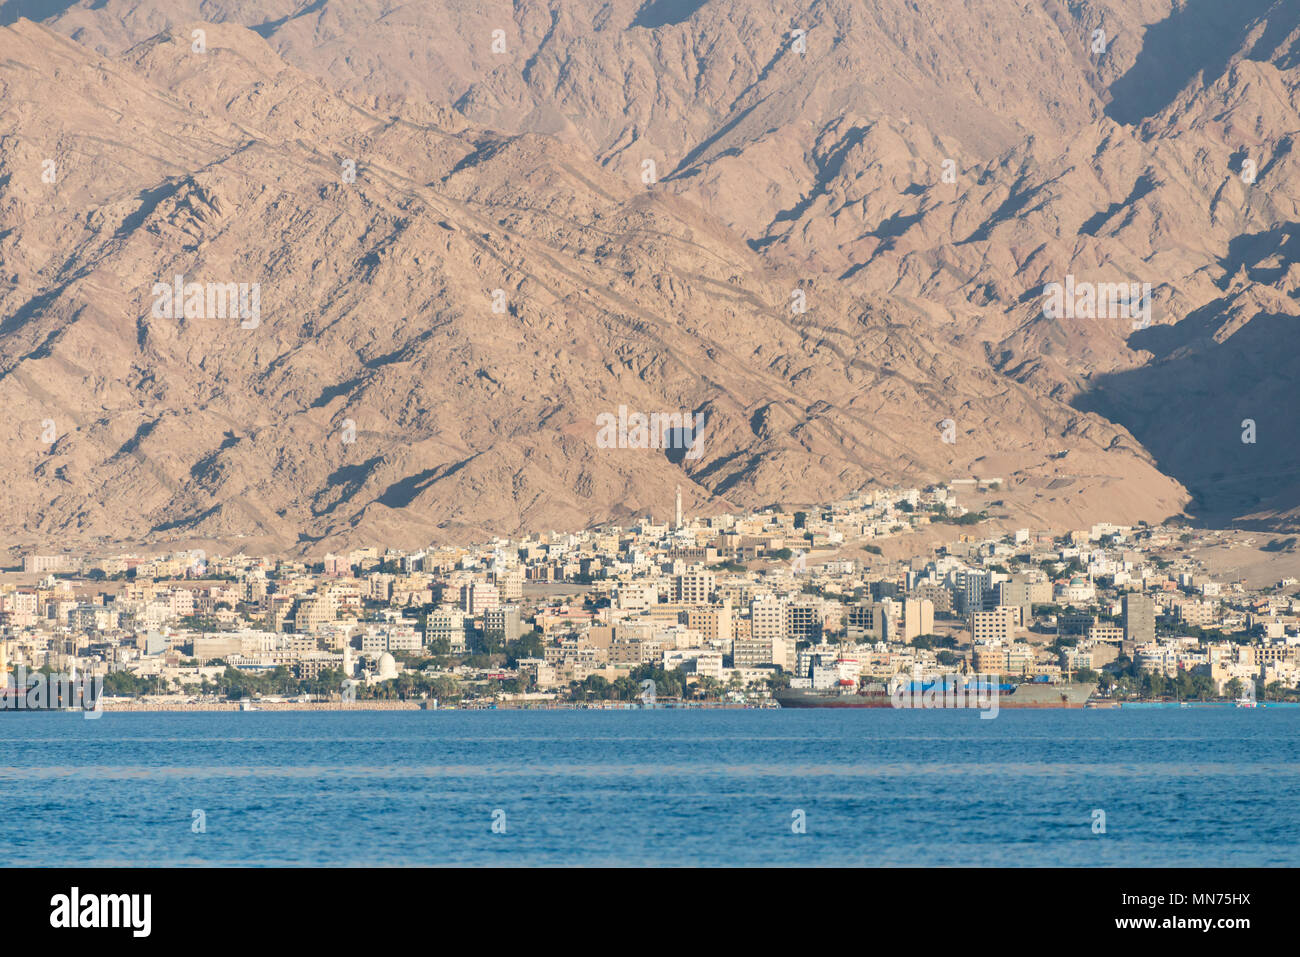 At Dolphin Reef in Eilat, Israel Stock Photo